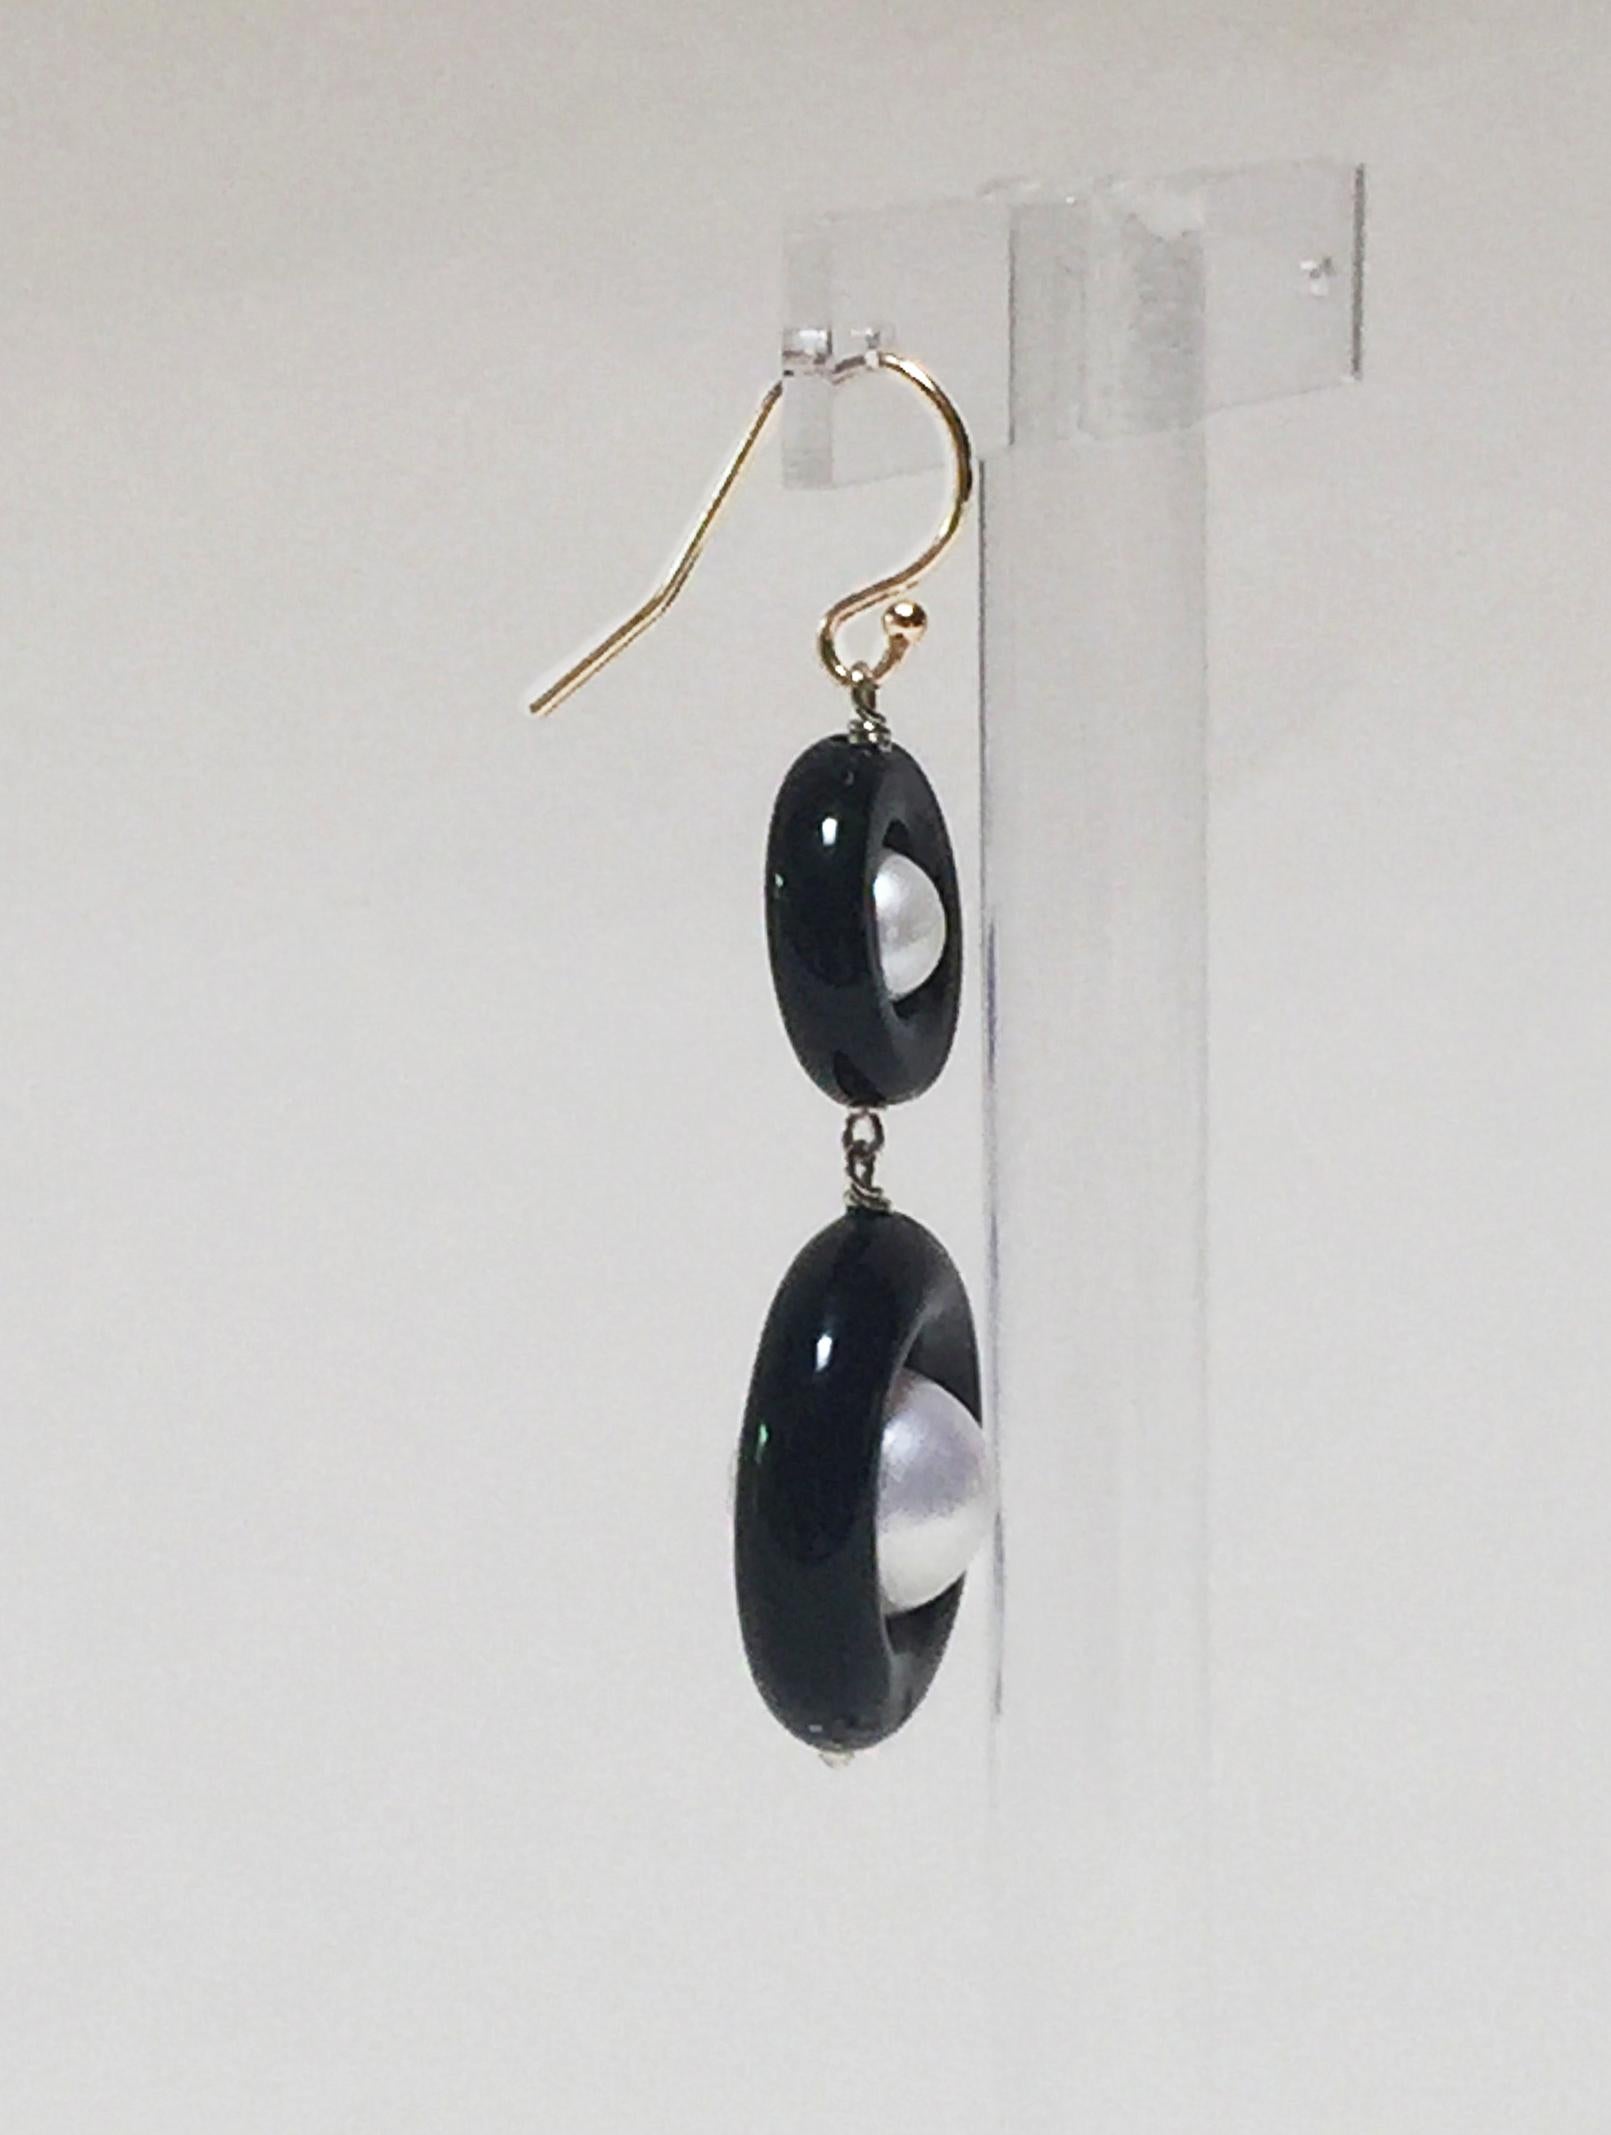 These classic double black onyx and pearl earrings with 14 k yellow gold hook and wiring are elegant and bold. The onyx rings contrast with the glowing white pearls beautifully making, what could have been simple earrings dramatic and eye-catching.